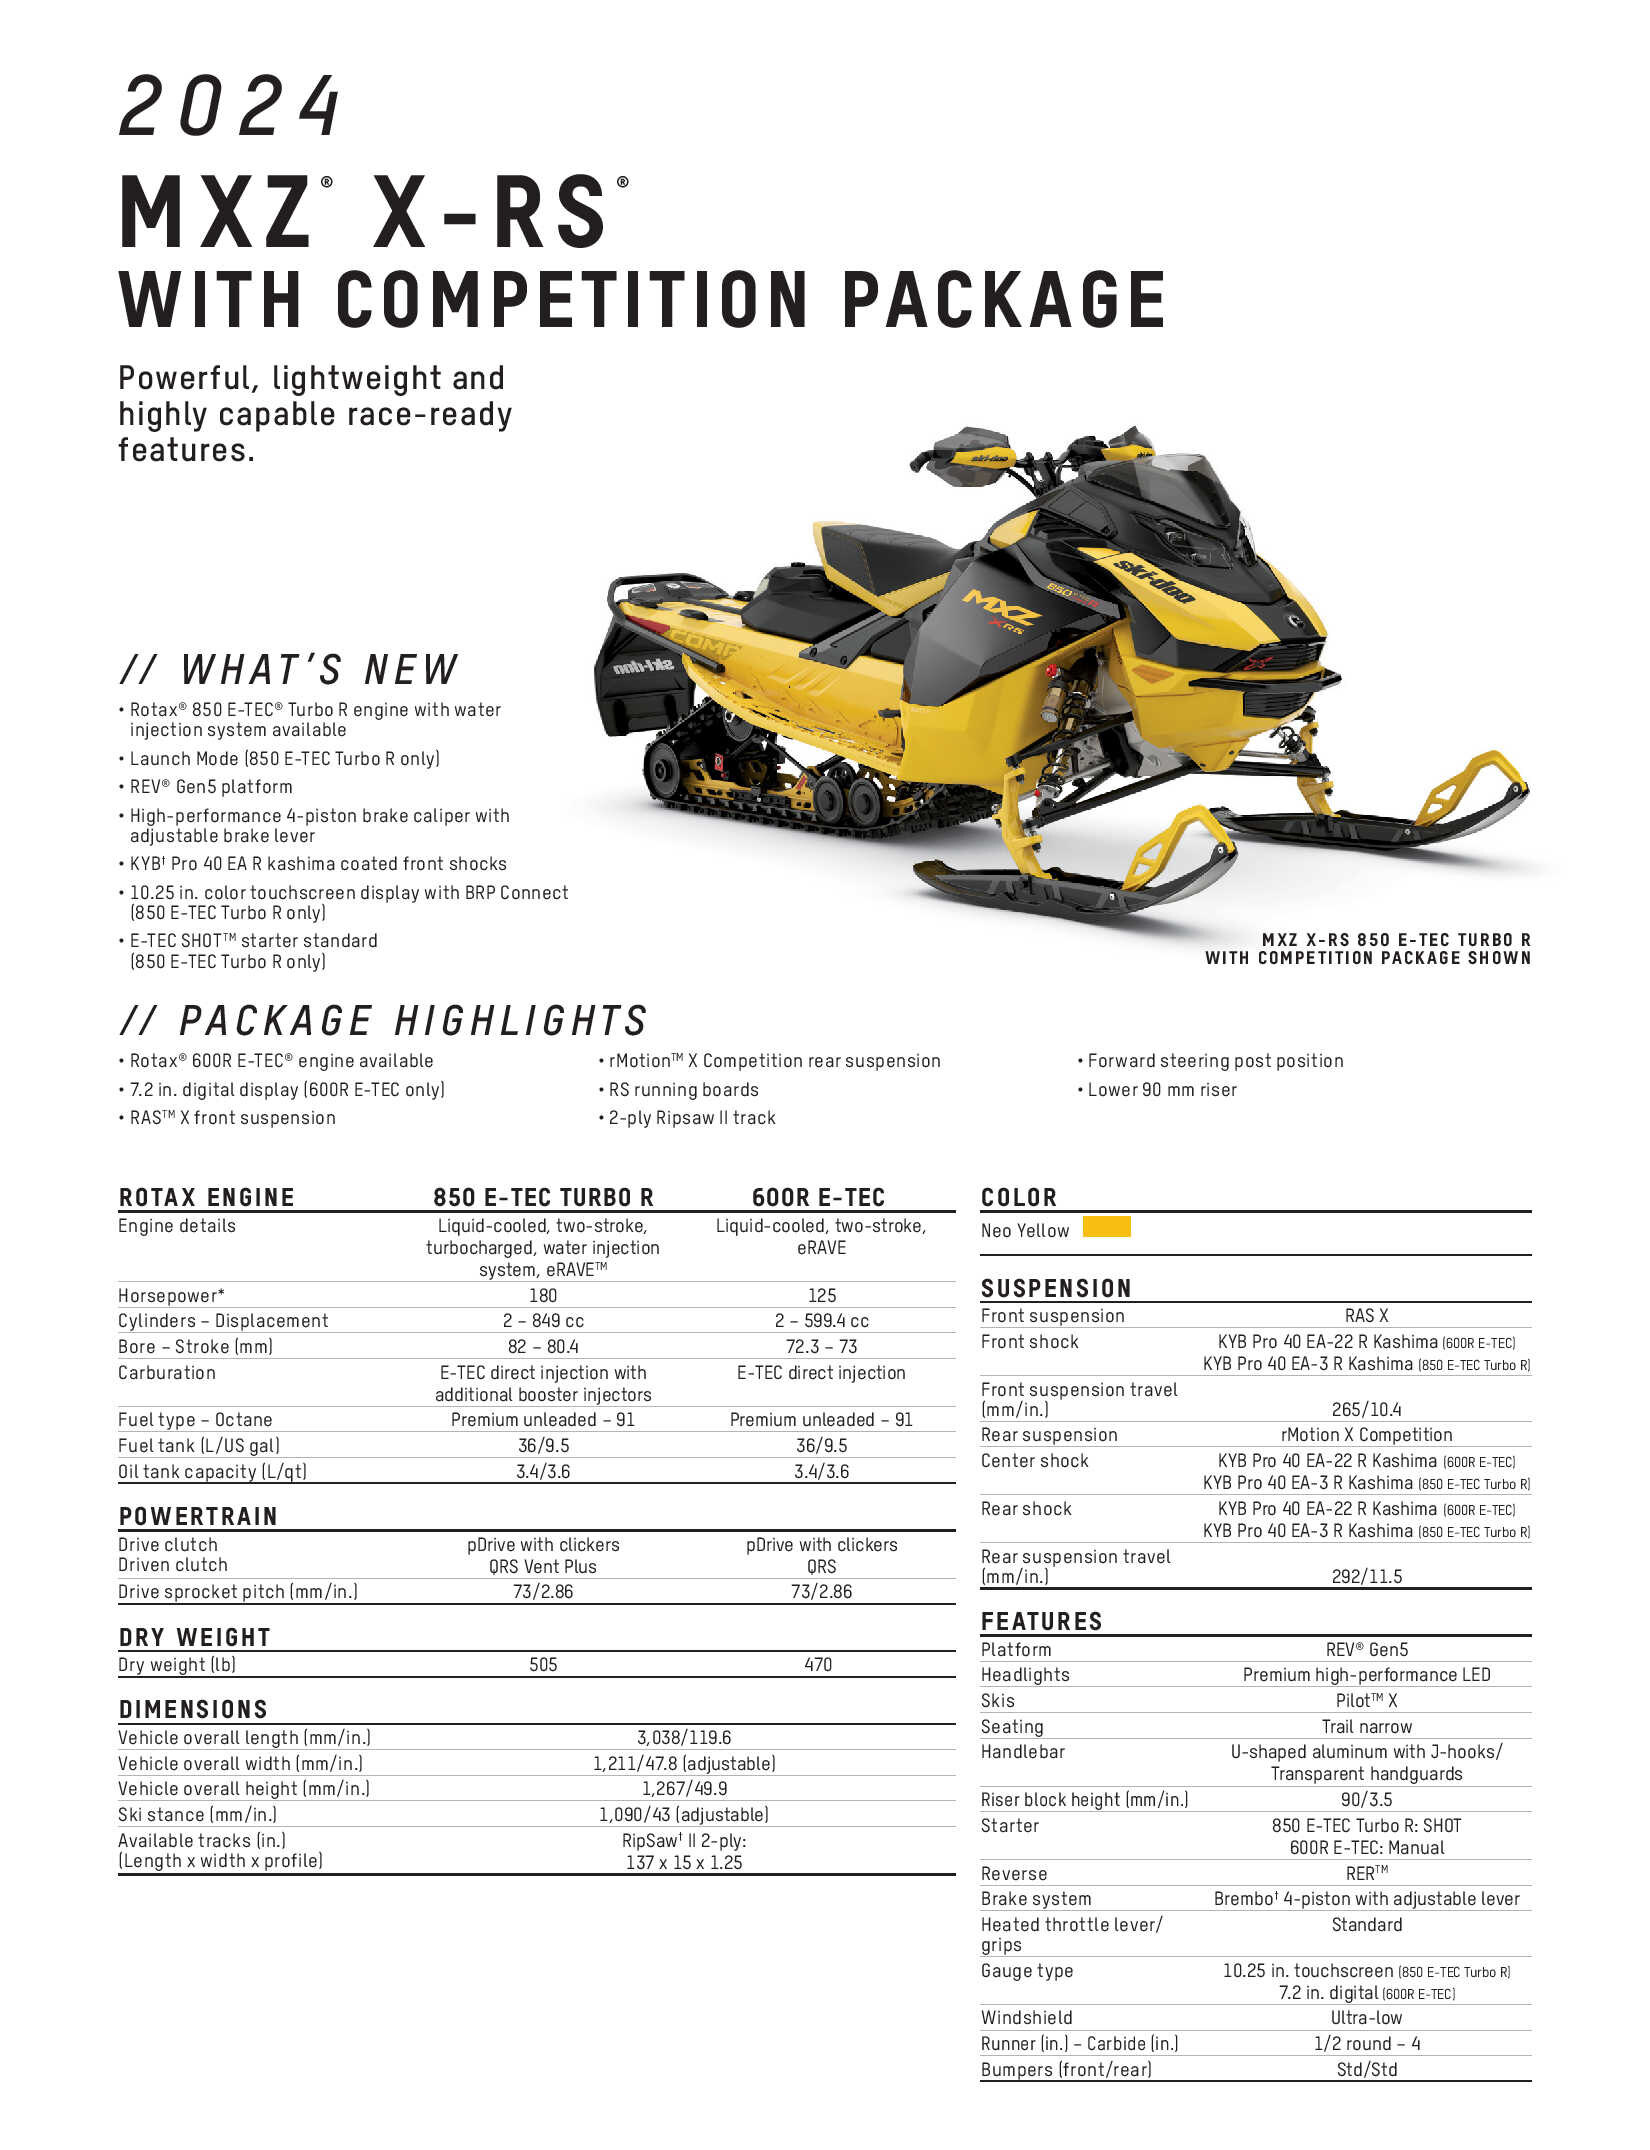 2024 Ski-Doo MXZ X-RS Competition Package Specs